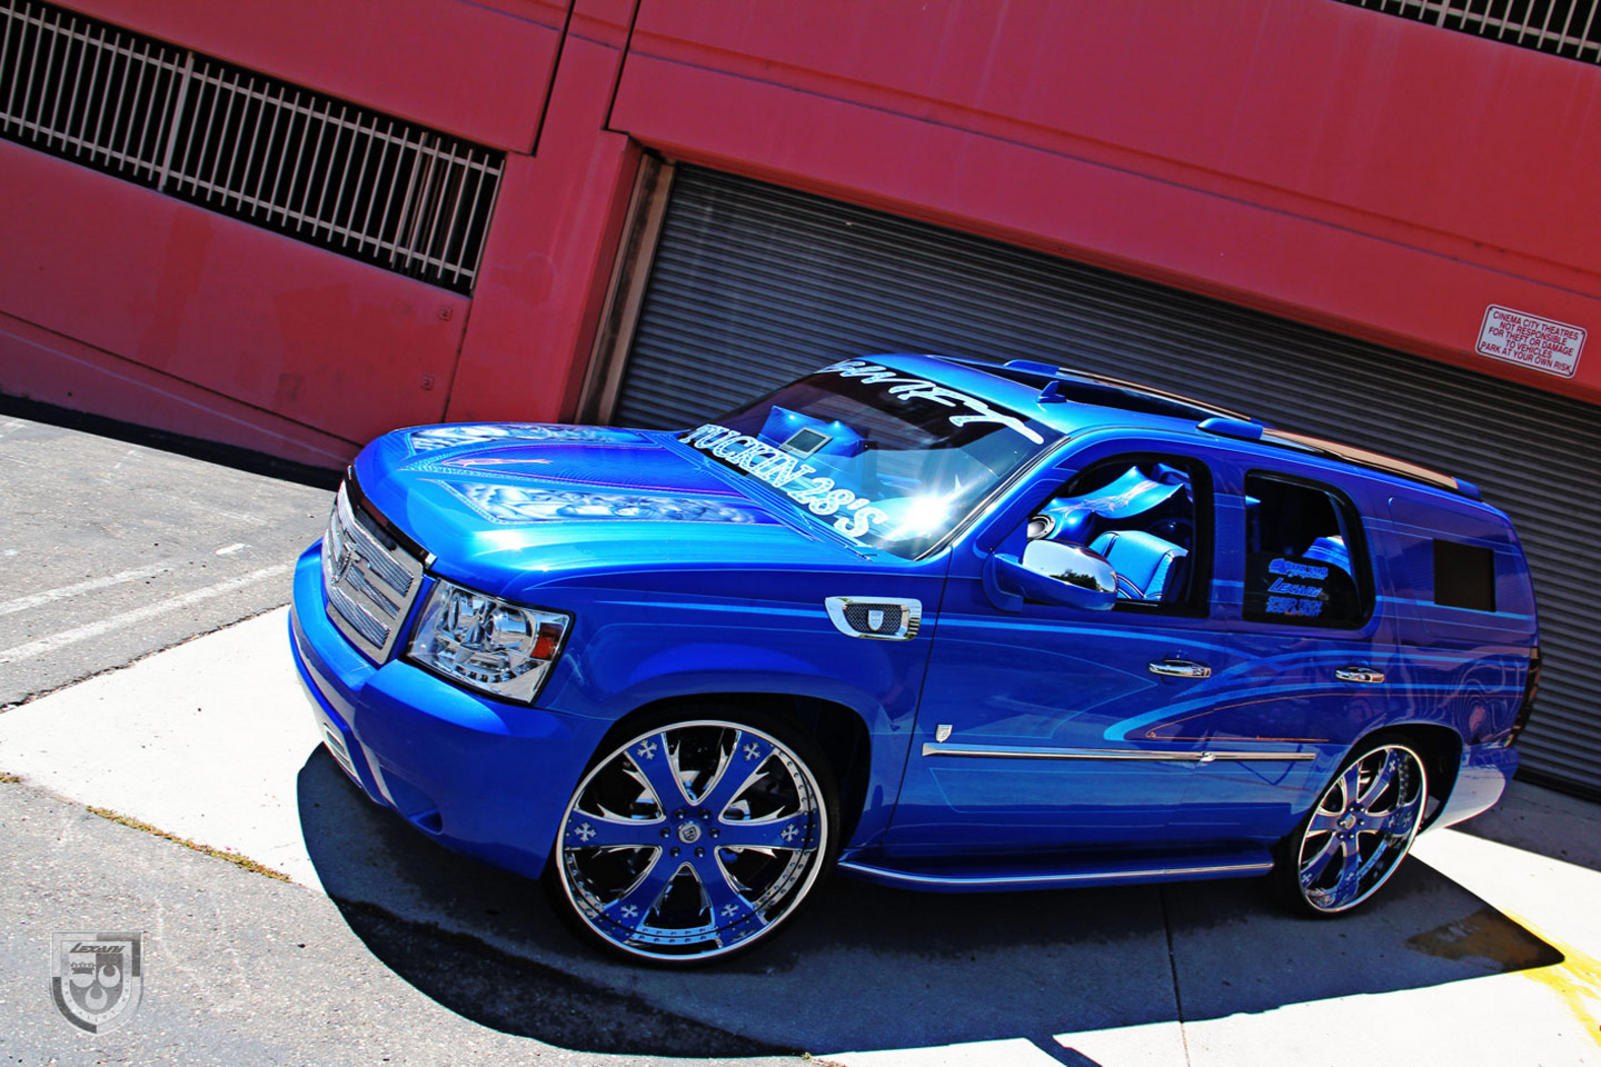 Lowered Chevy Tahoe on Chrome and Blue LT-Series Wheels - Photo by Lexani